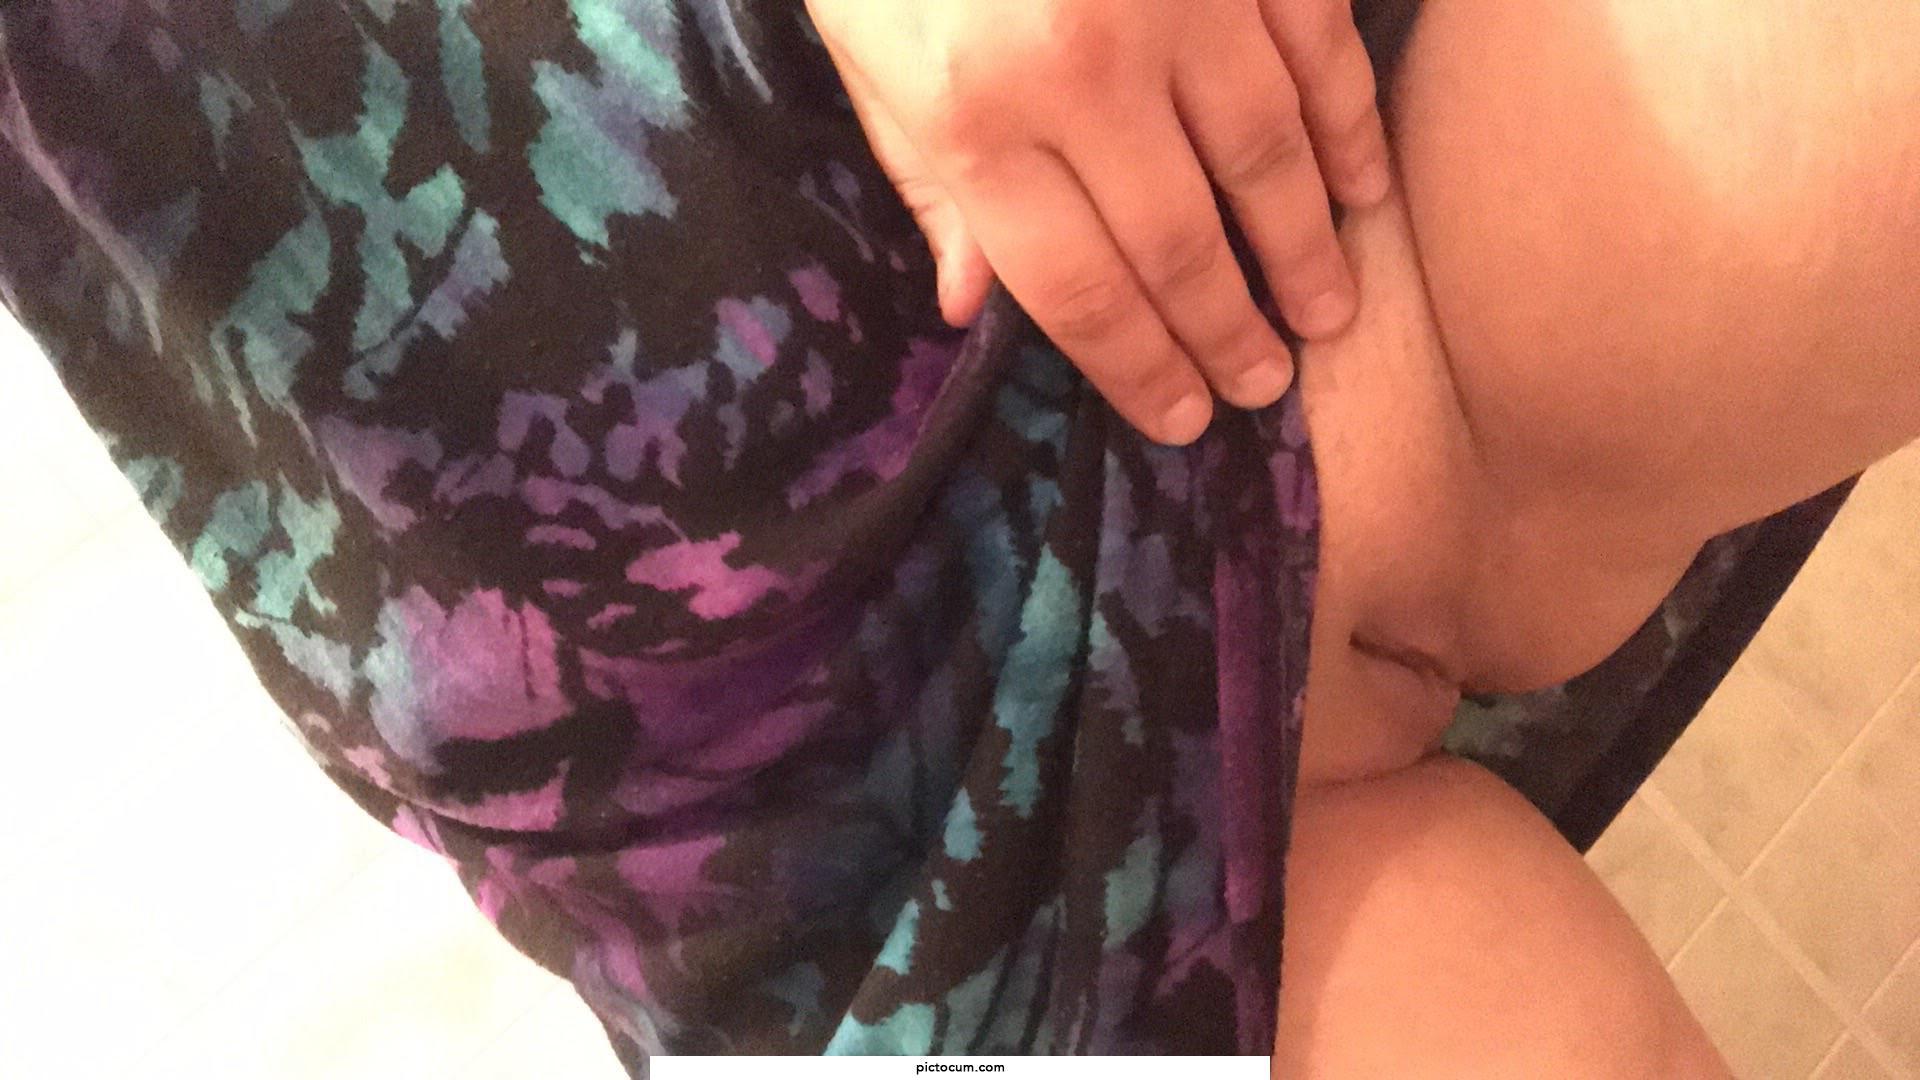 I went alll day with no panties. Who wants to spank and suck my soaked little pussy?